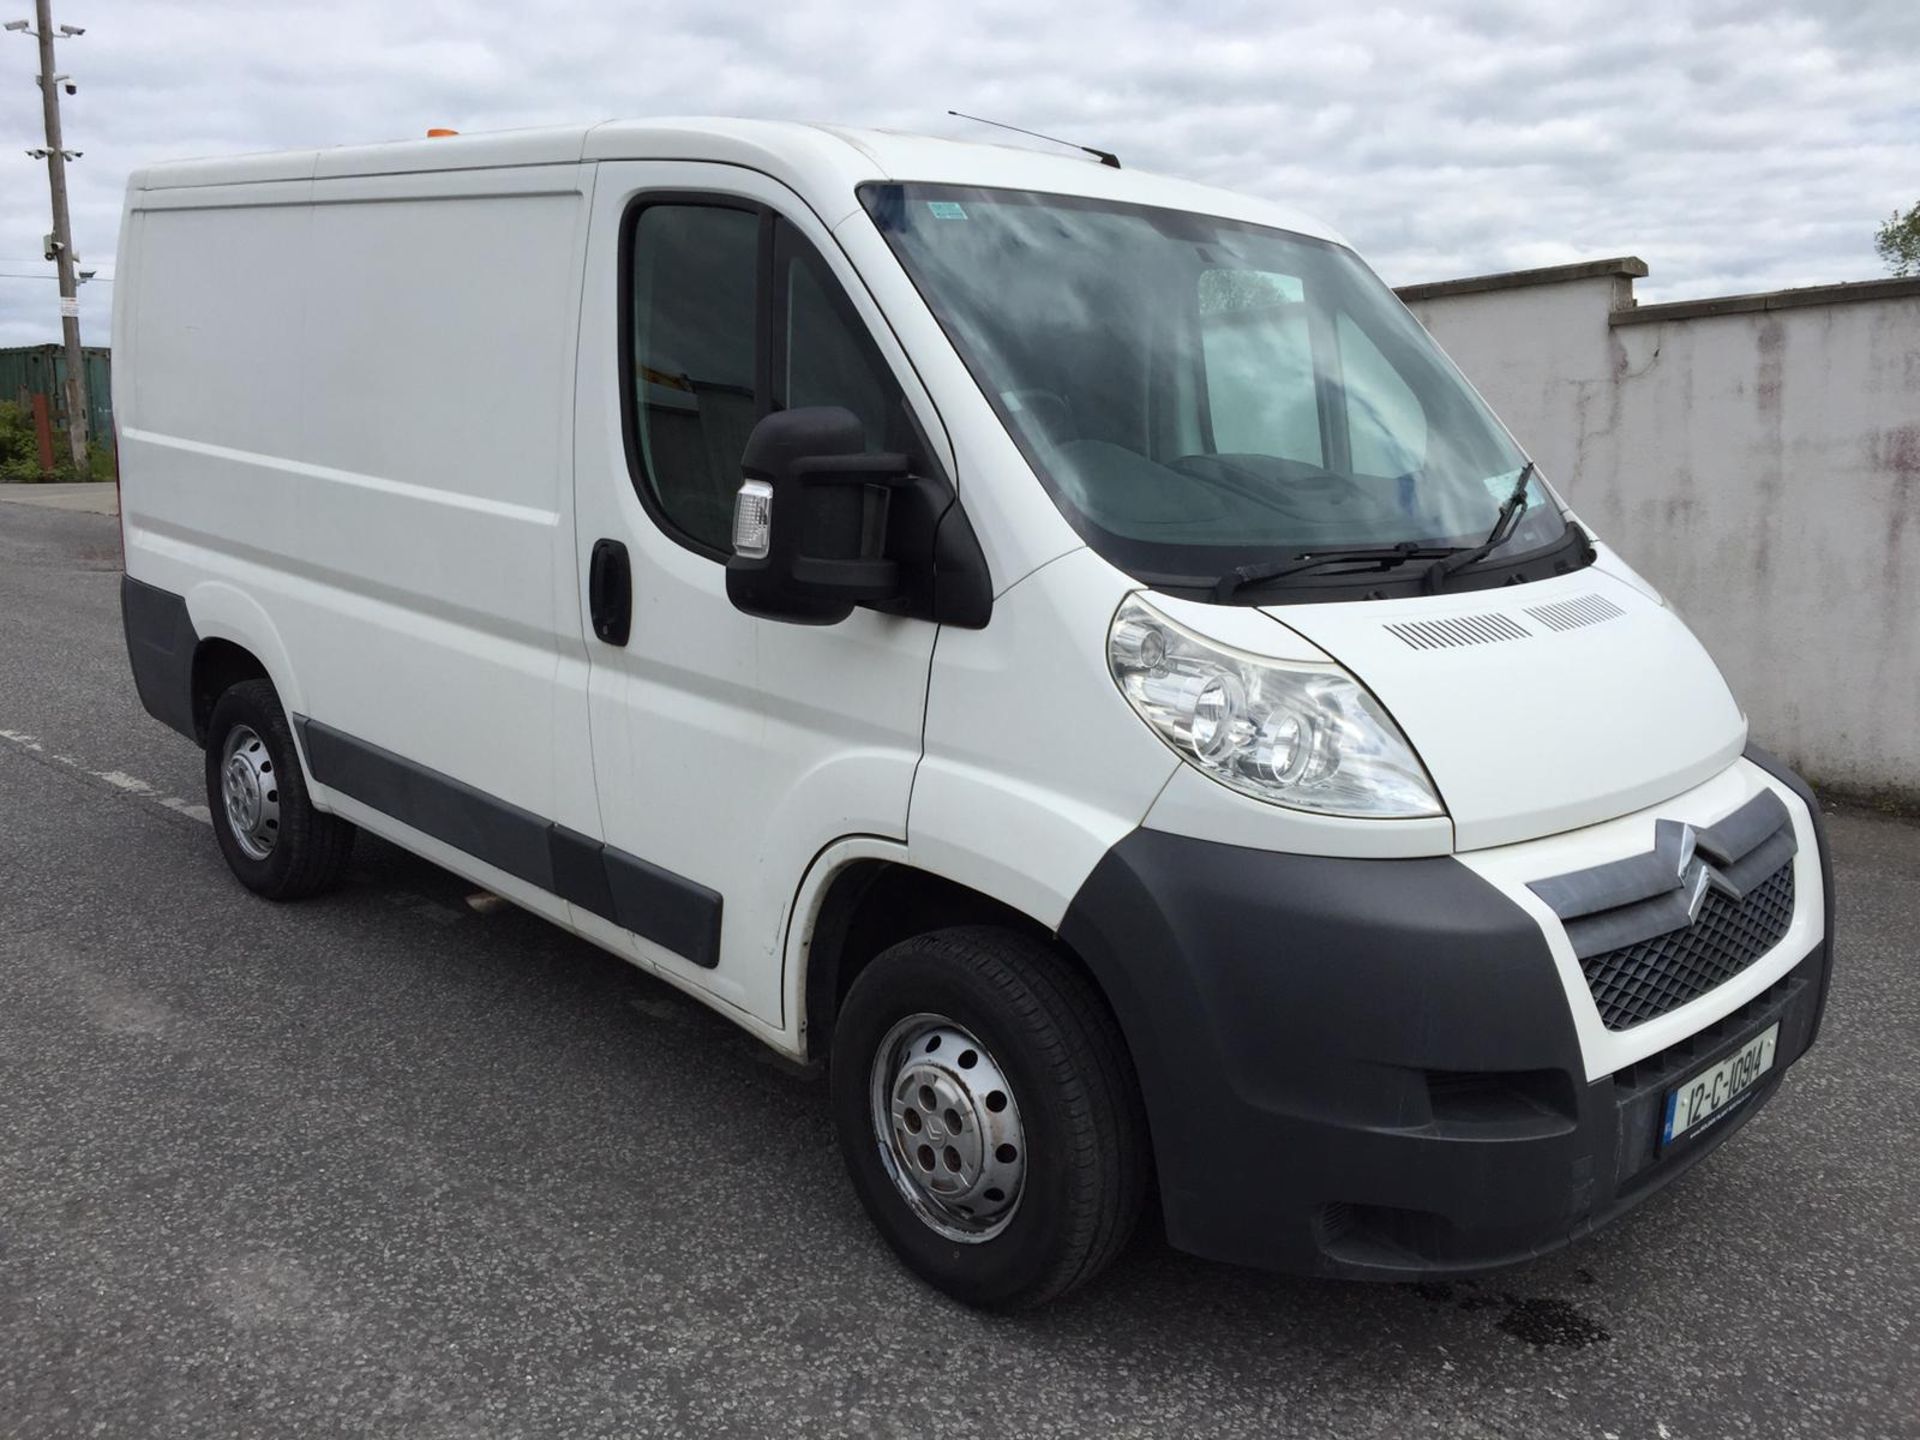 12C10914 UNRESERVED 2012 Citroen Relay 2 30 L1 H1 HDI - Image 2 of 8